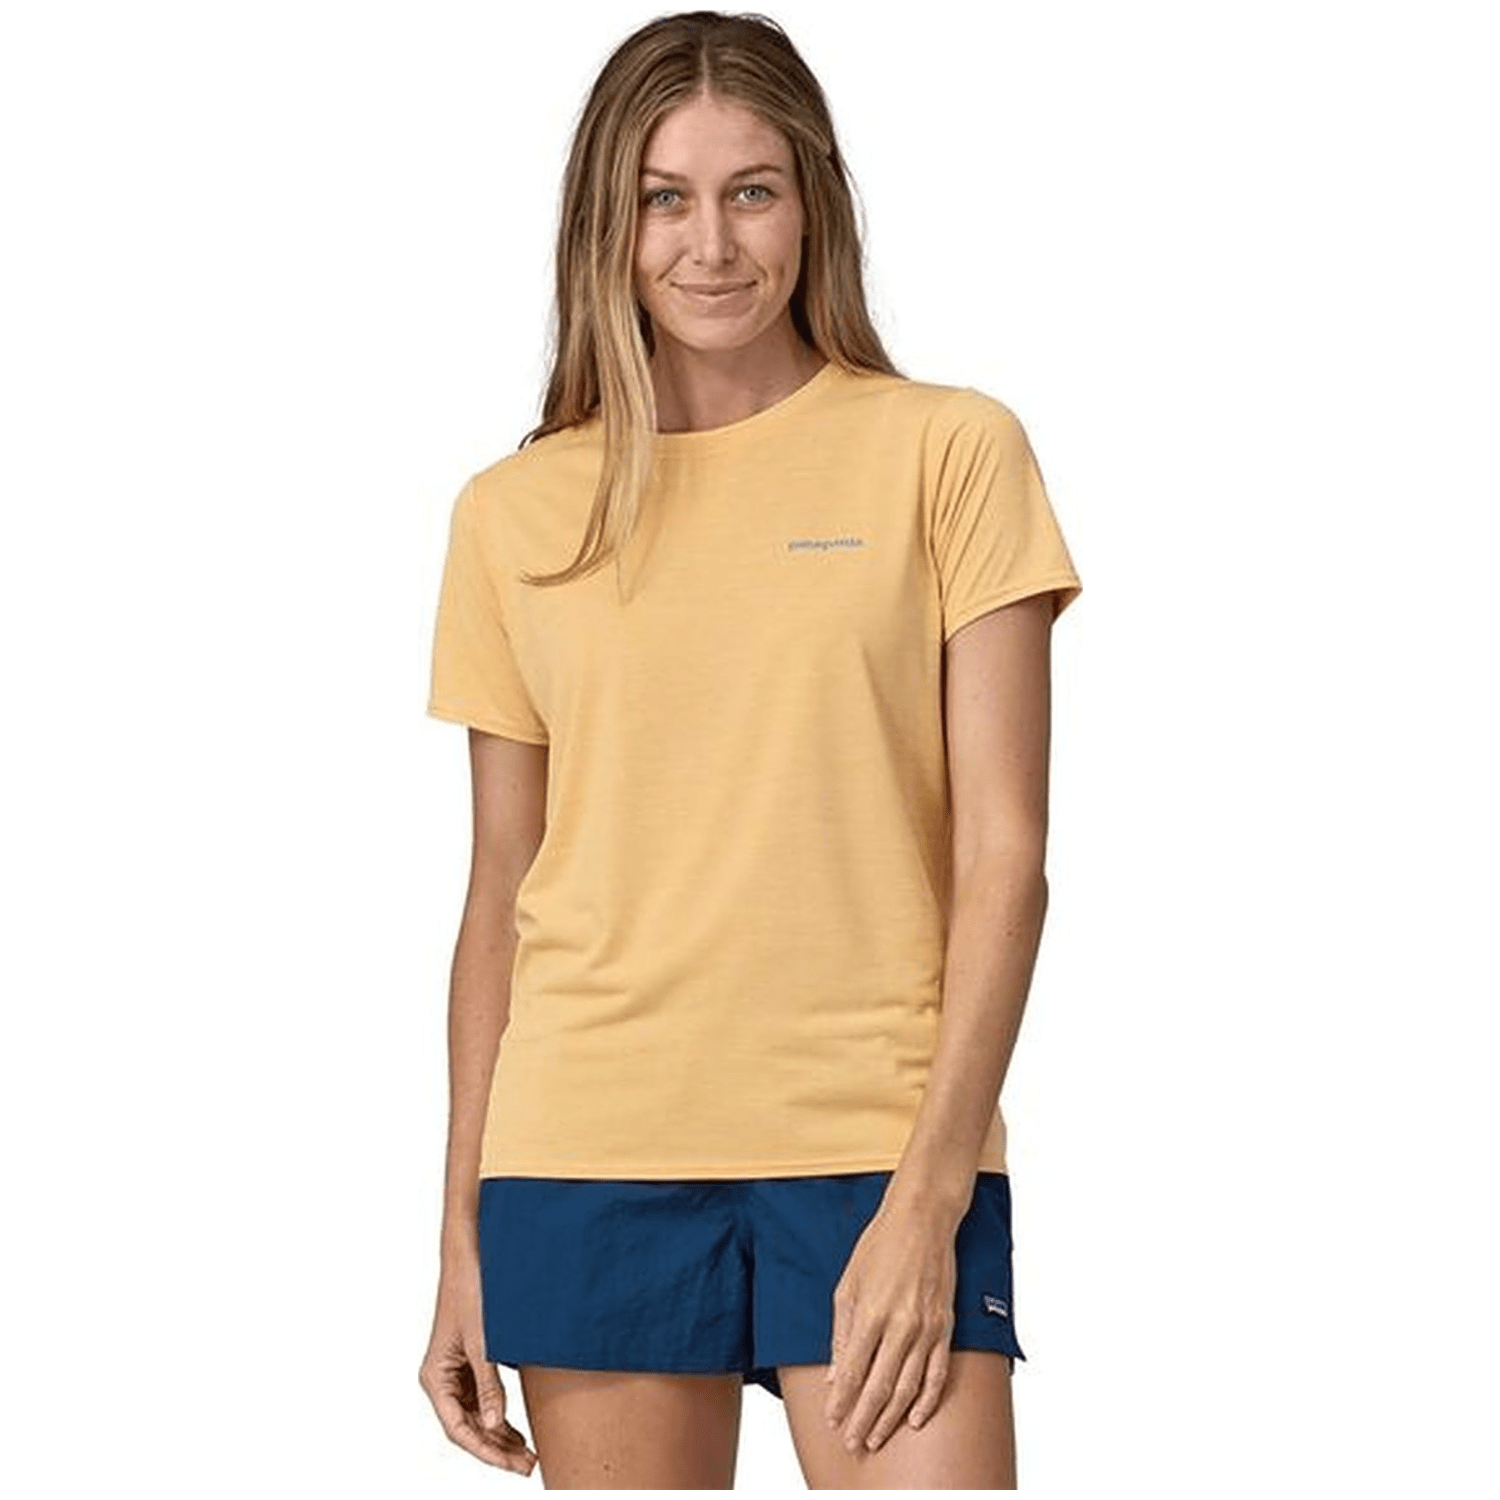 Patagonia Cool Daily Graphic - Waters Damen T-Shirt